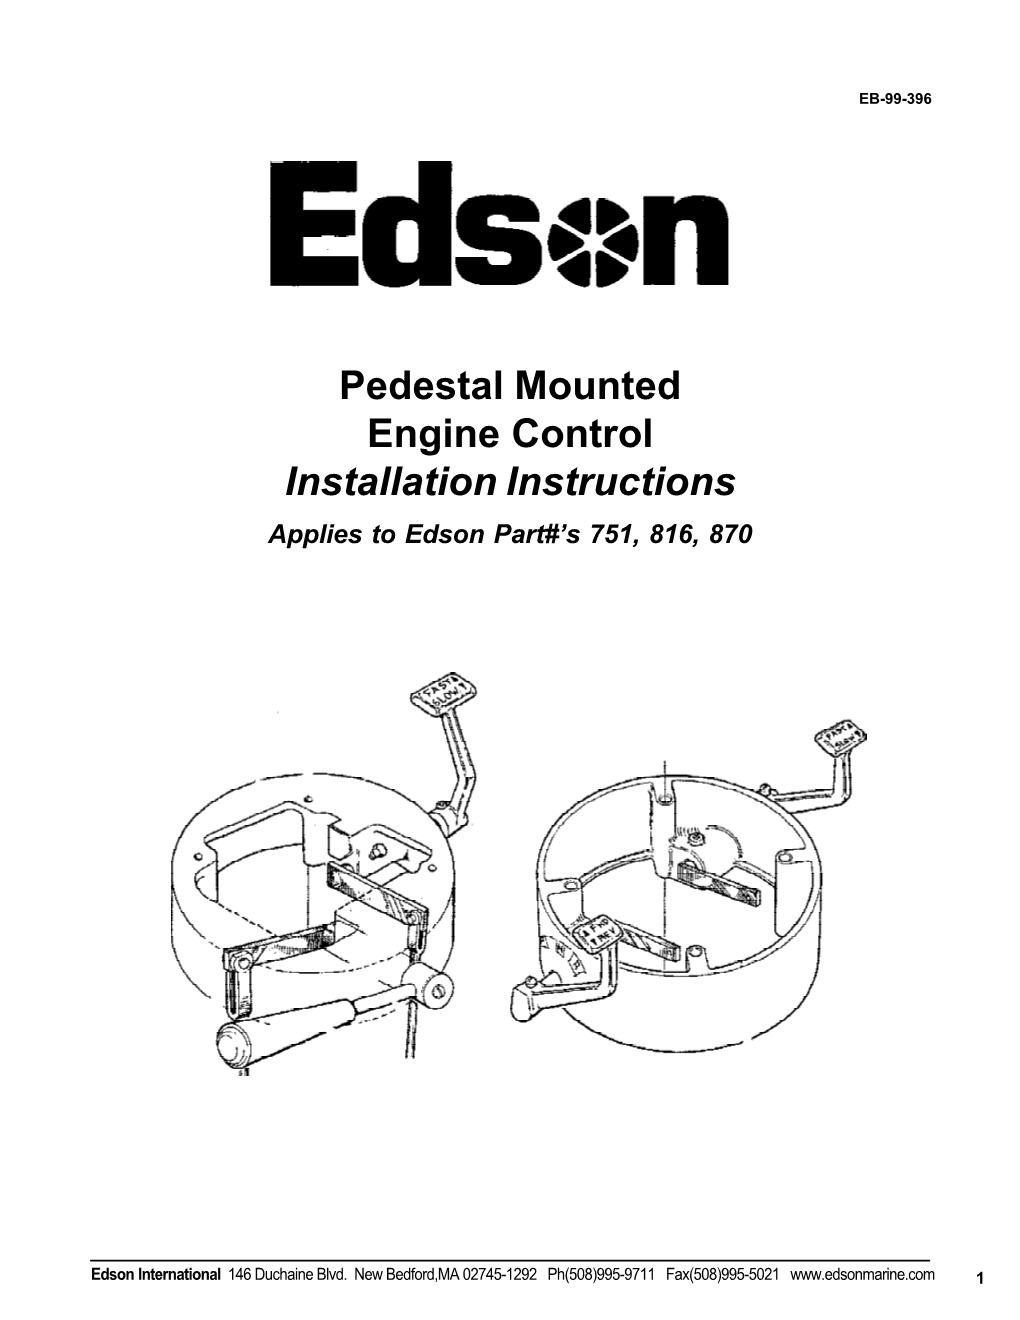 Pedestal Mounted Engine Control Installation Instructions Applies to Edson Part#’S 751, 816, 870